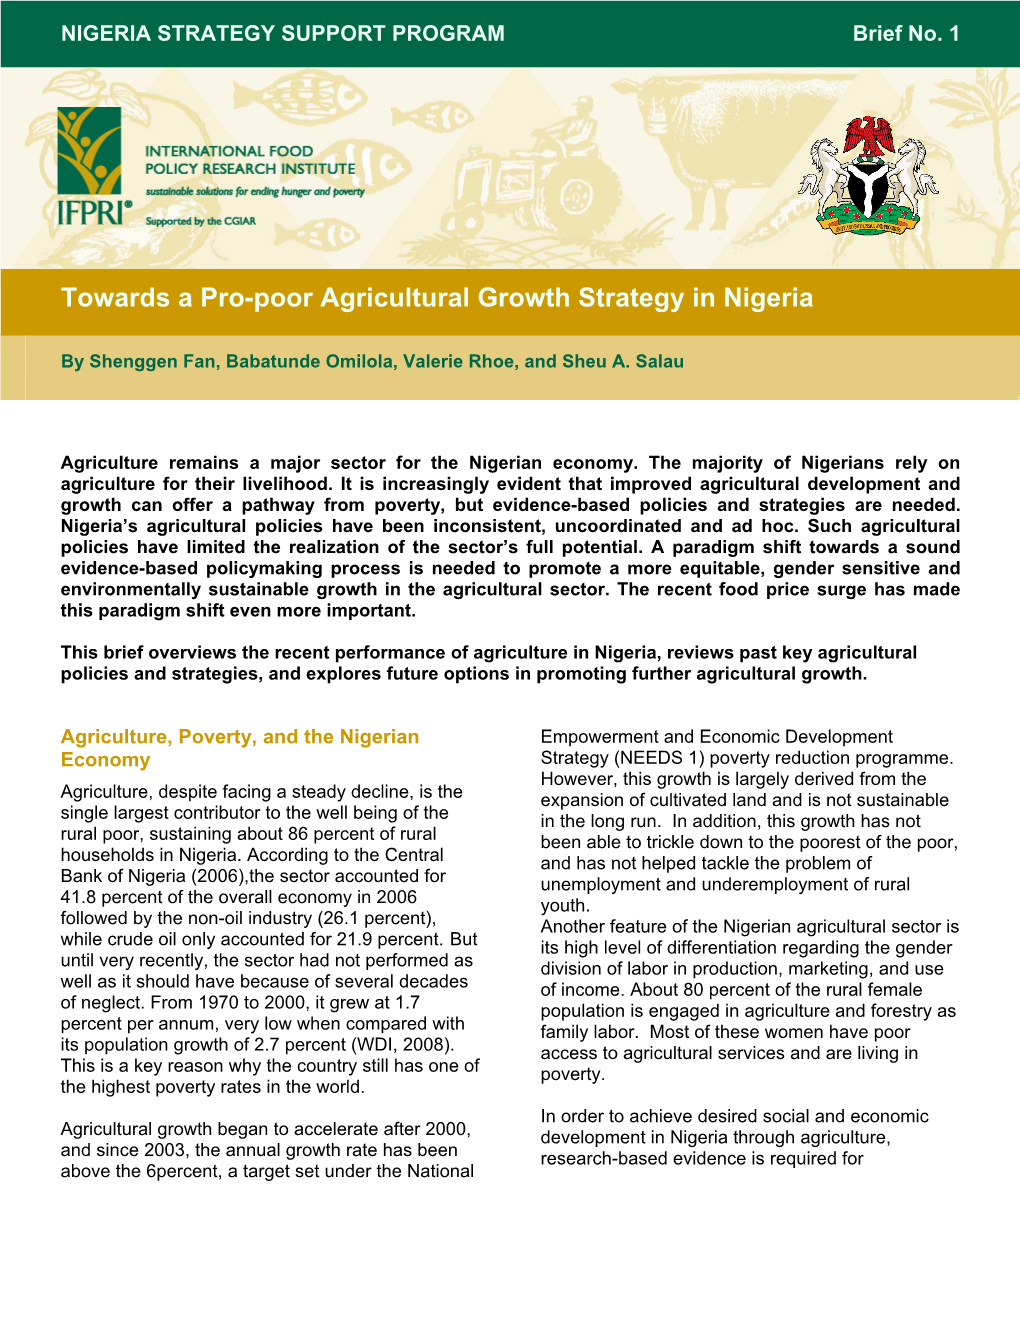 Towards a Pro-Poor Agricultural Growth Strategy in Nigeria